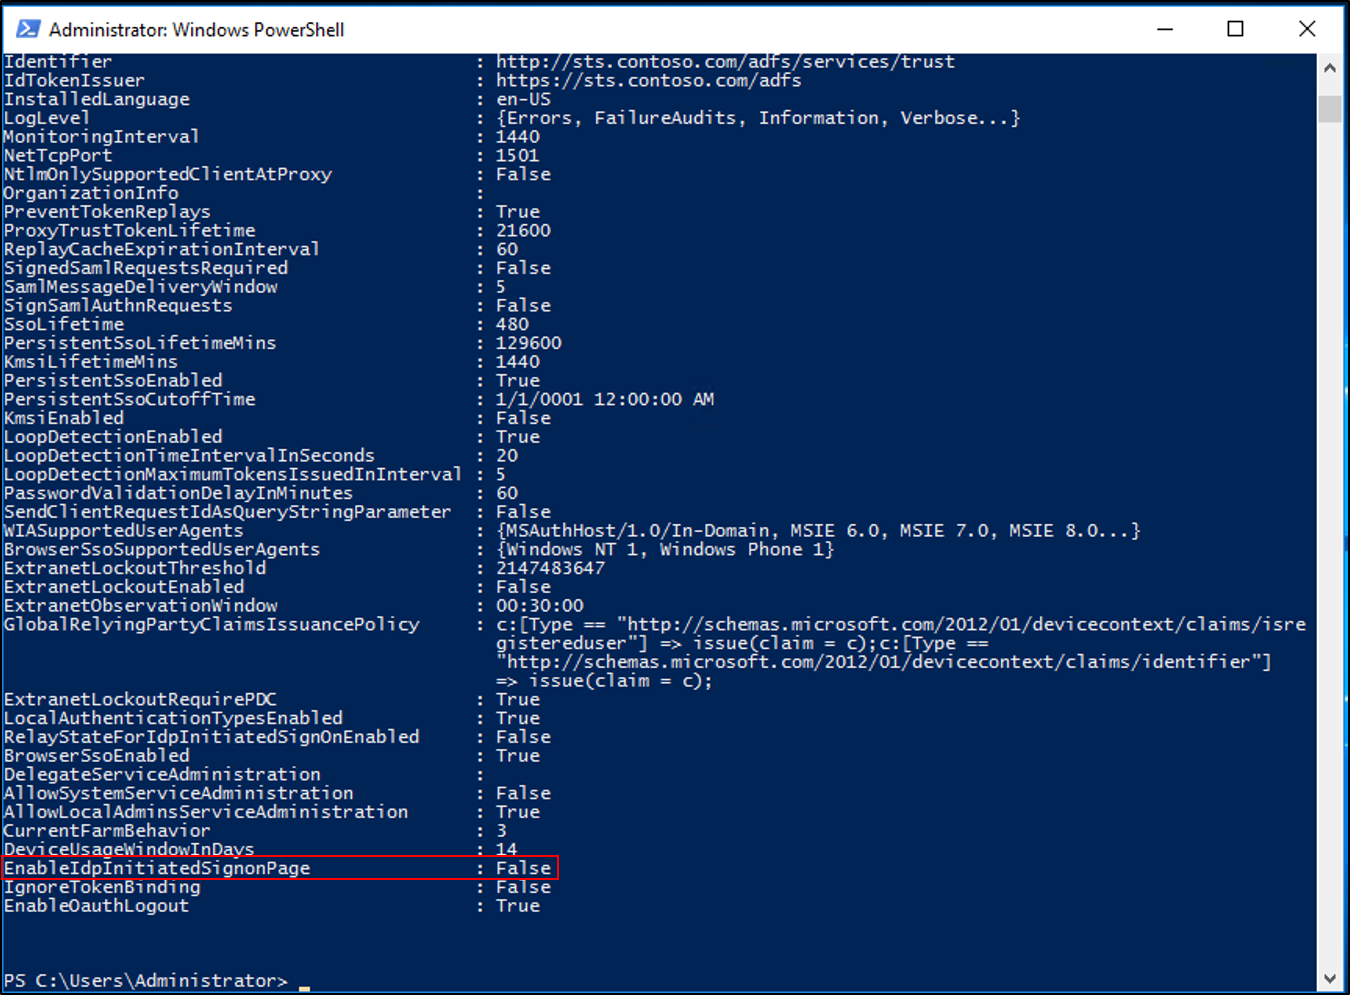 Screenshot showing PowerShell output highlighting that the EnableIdpInitiatedSignonPage property is set to false.